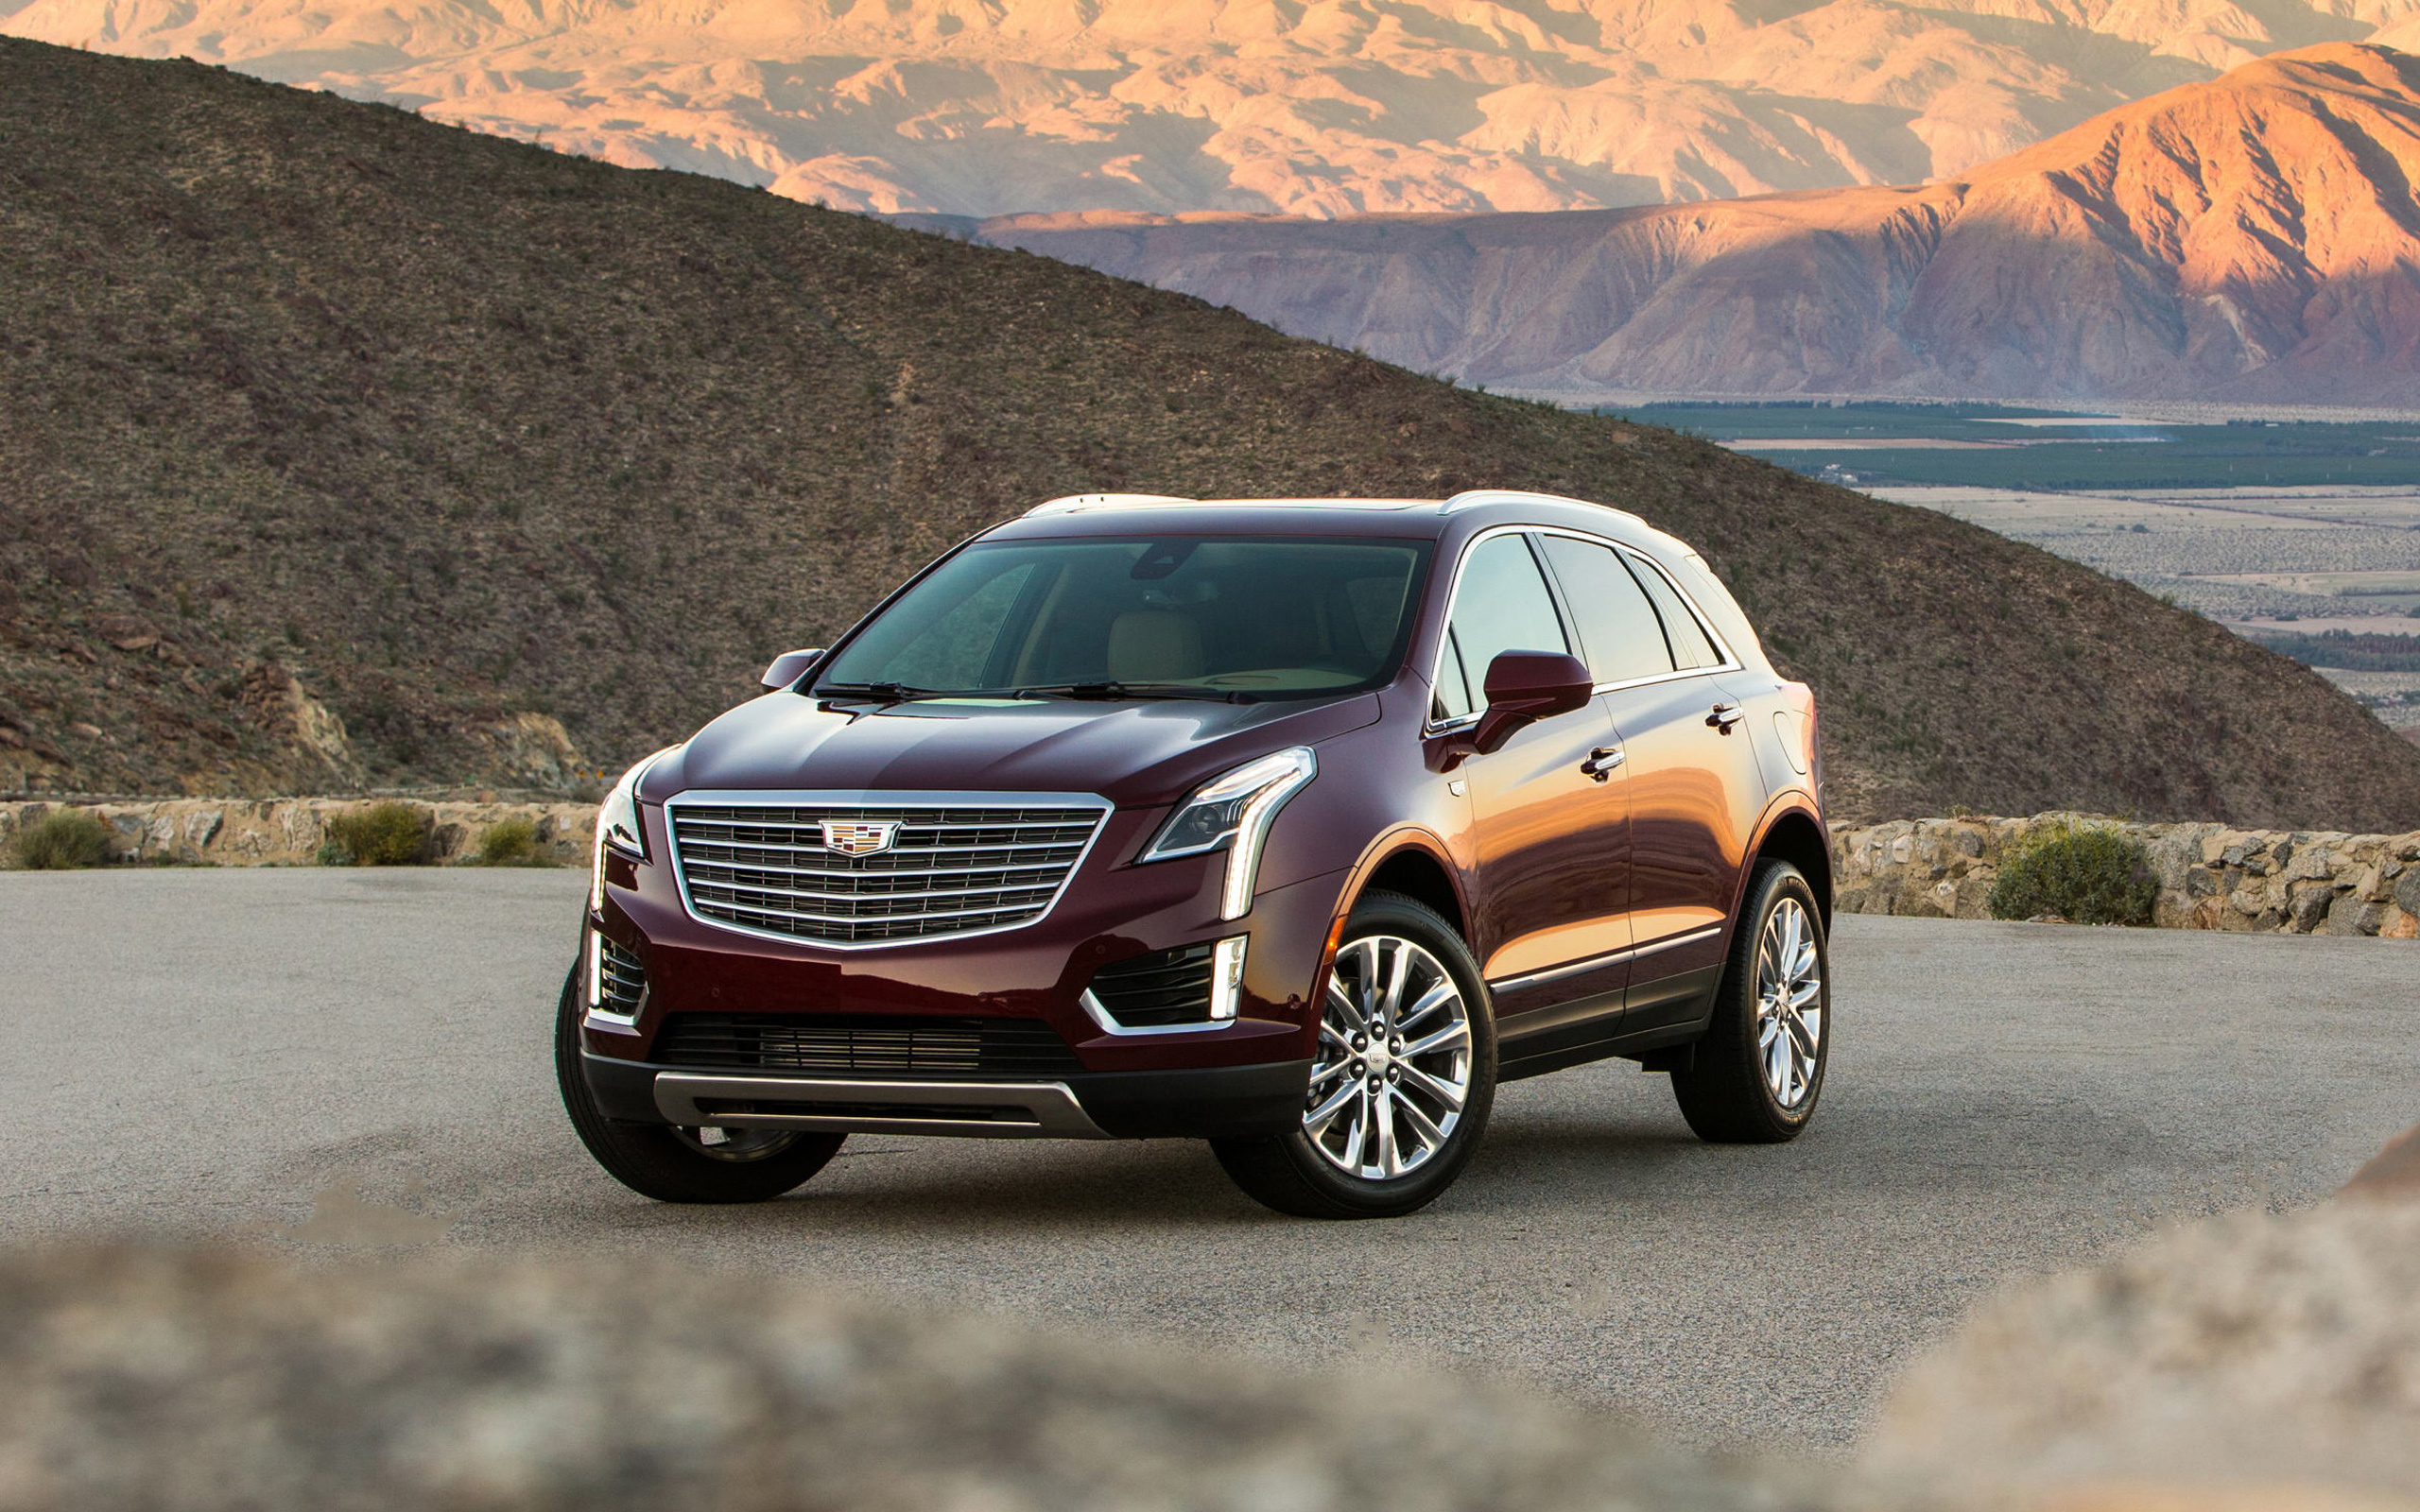 Cadillac XT5 2018, Luxury American crossover, High-quality pictures, 2560x1600 HD Desktop